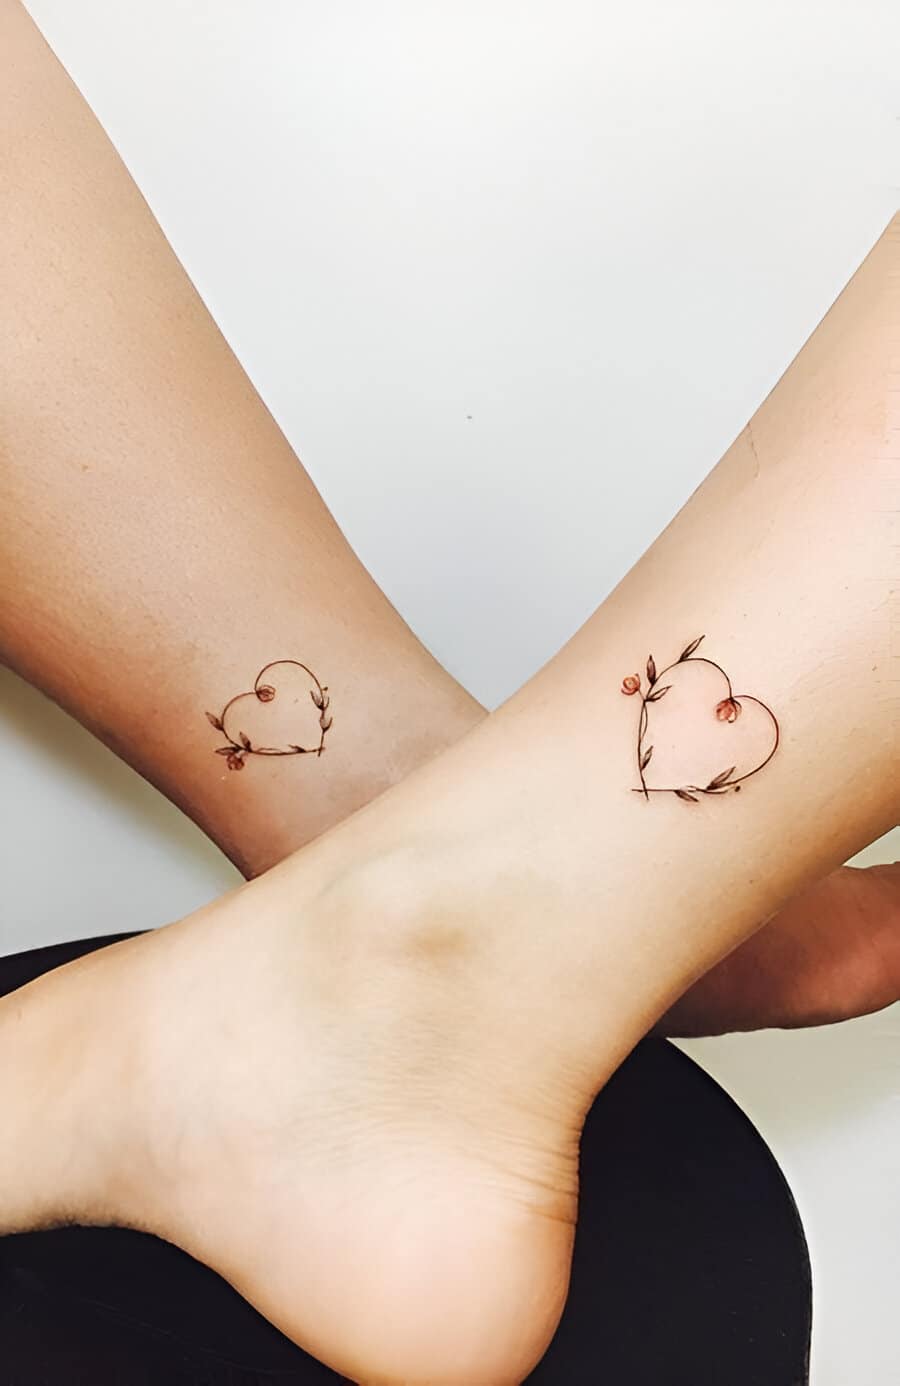 30 Elegant Matching Heart Tattoos To Get With Your Partner ASAP 19